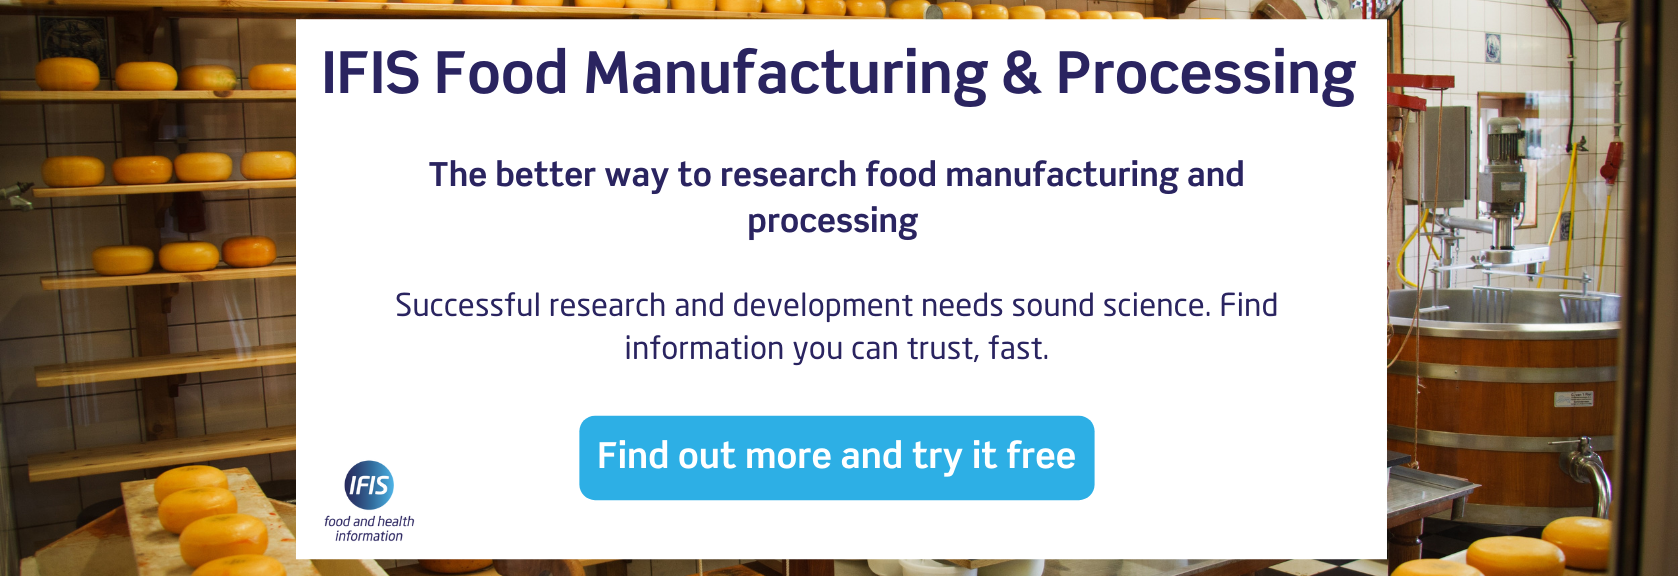 IFIS Food Manufacturing & Processing CTA